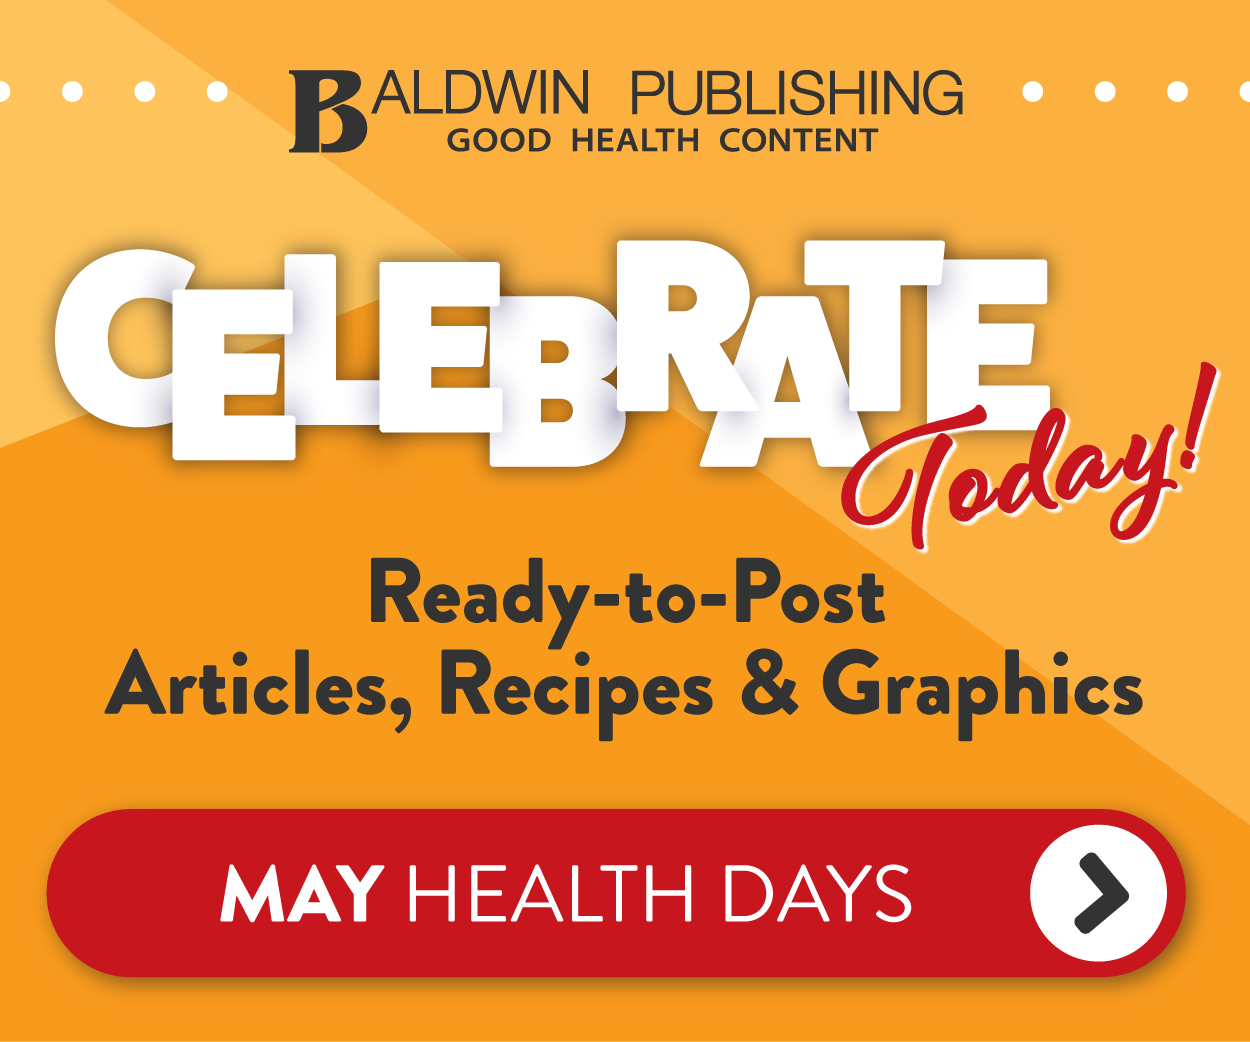 Baldwin Publishing - Celebrate Today, See All May Health Days